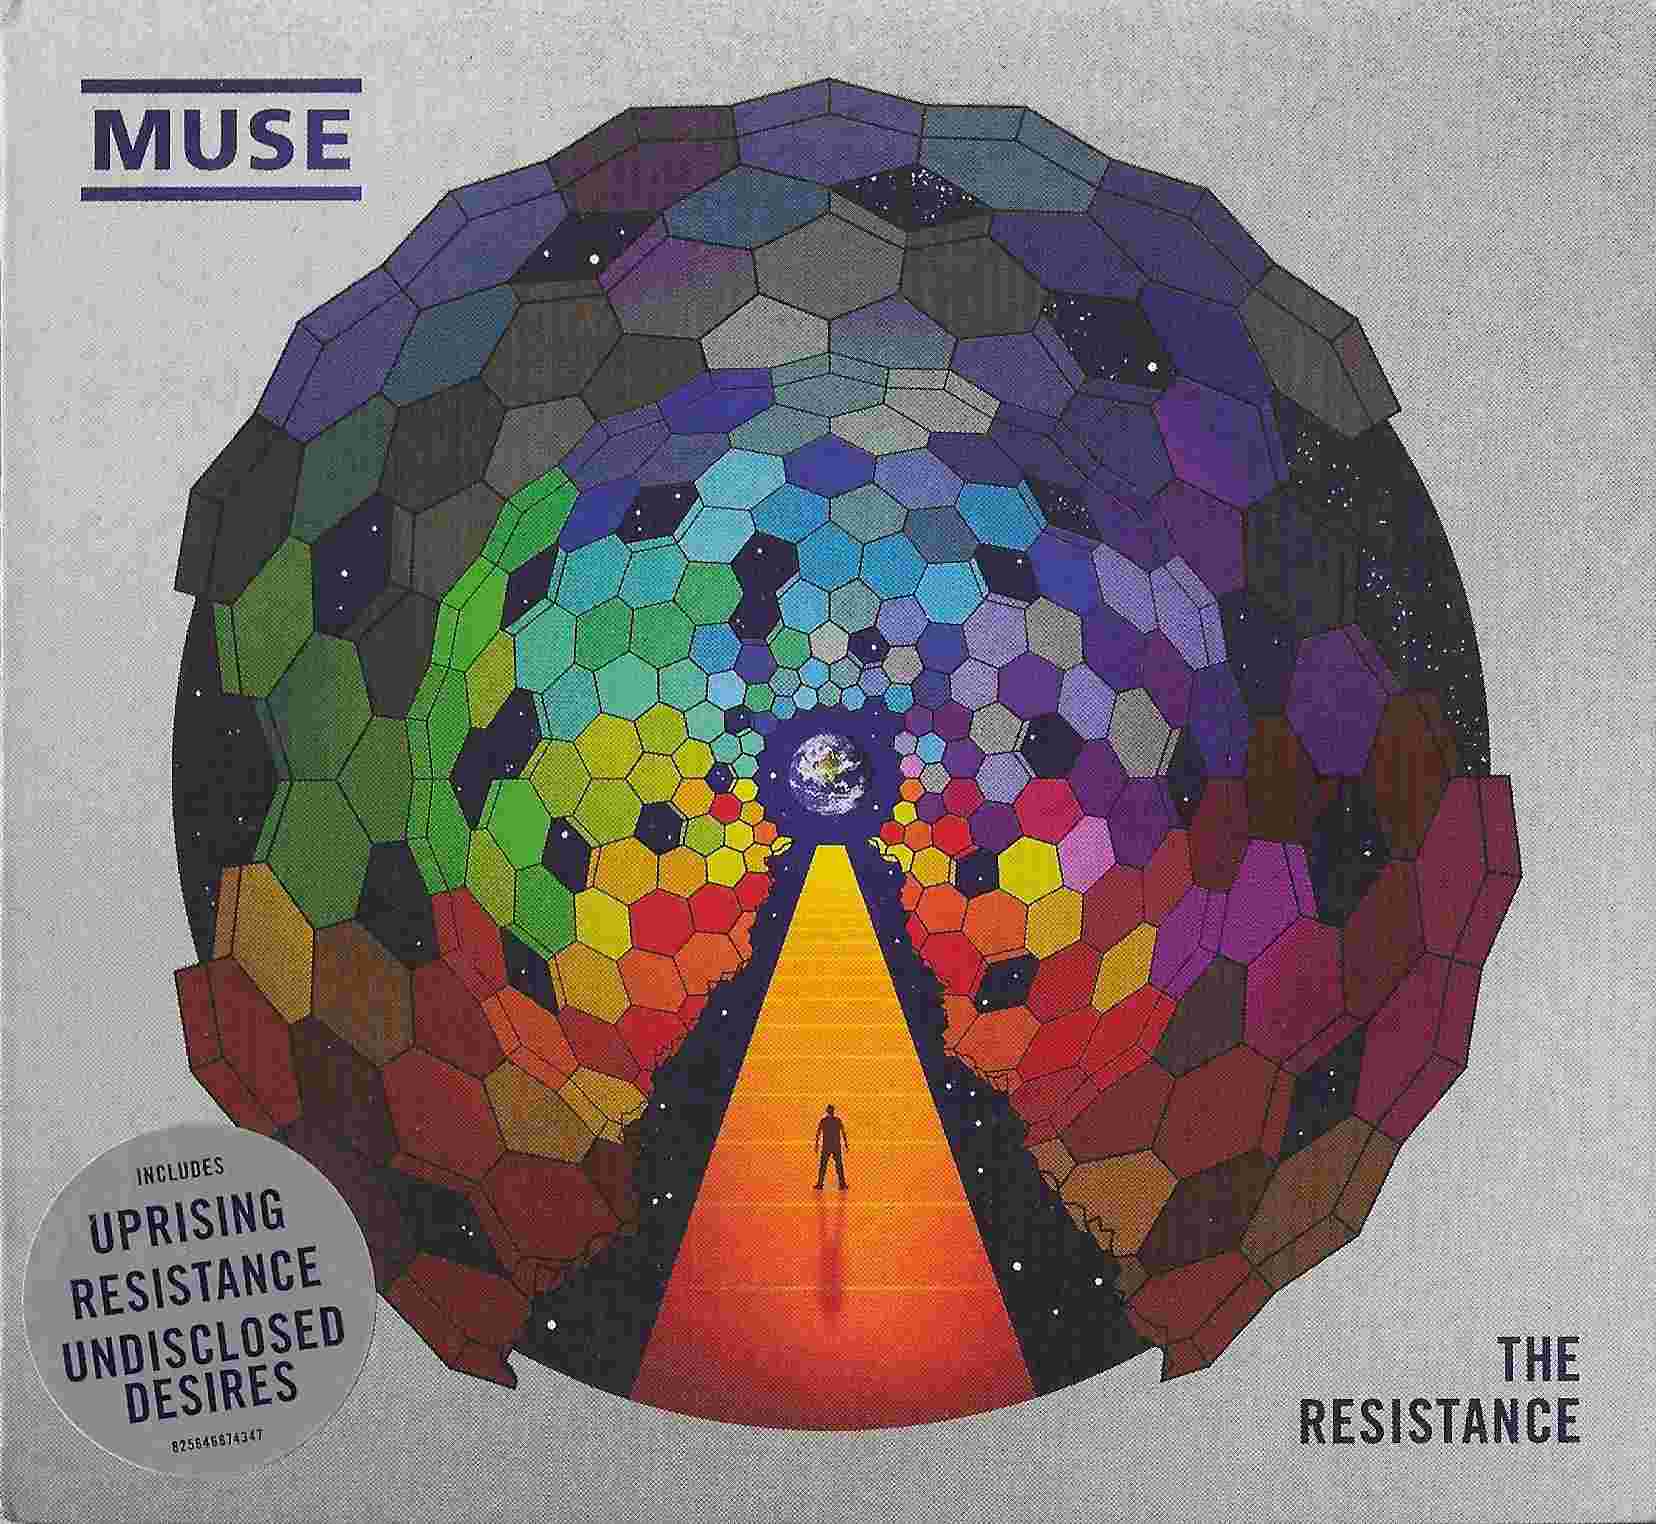 Picture of The resistance by artist Muse 